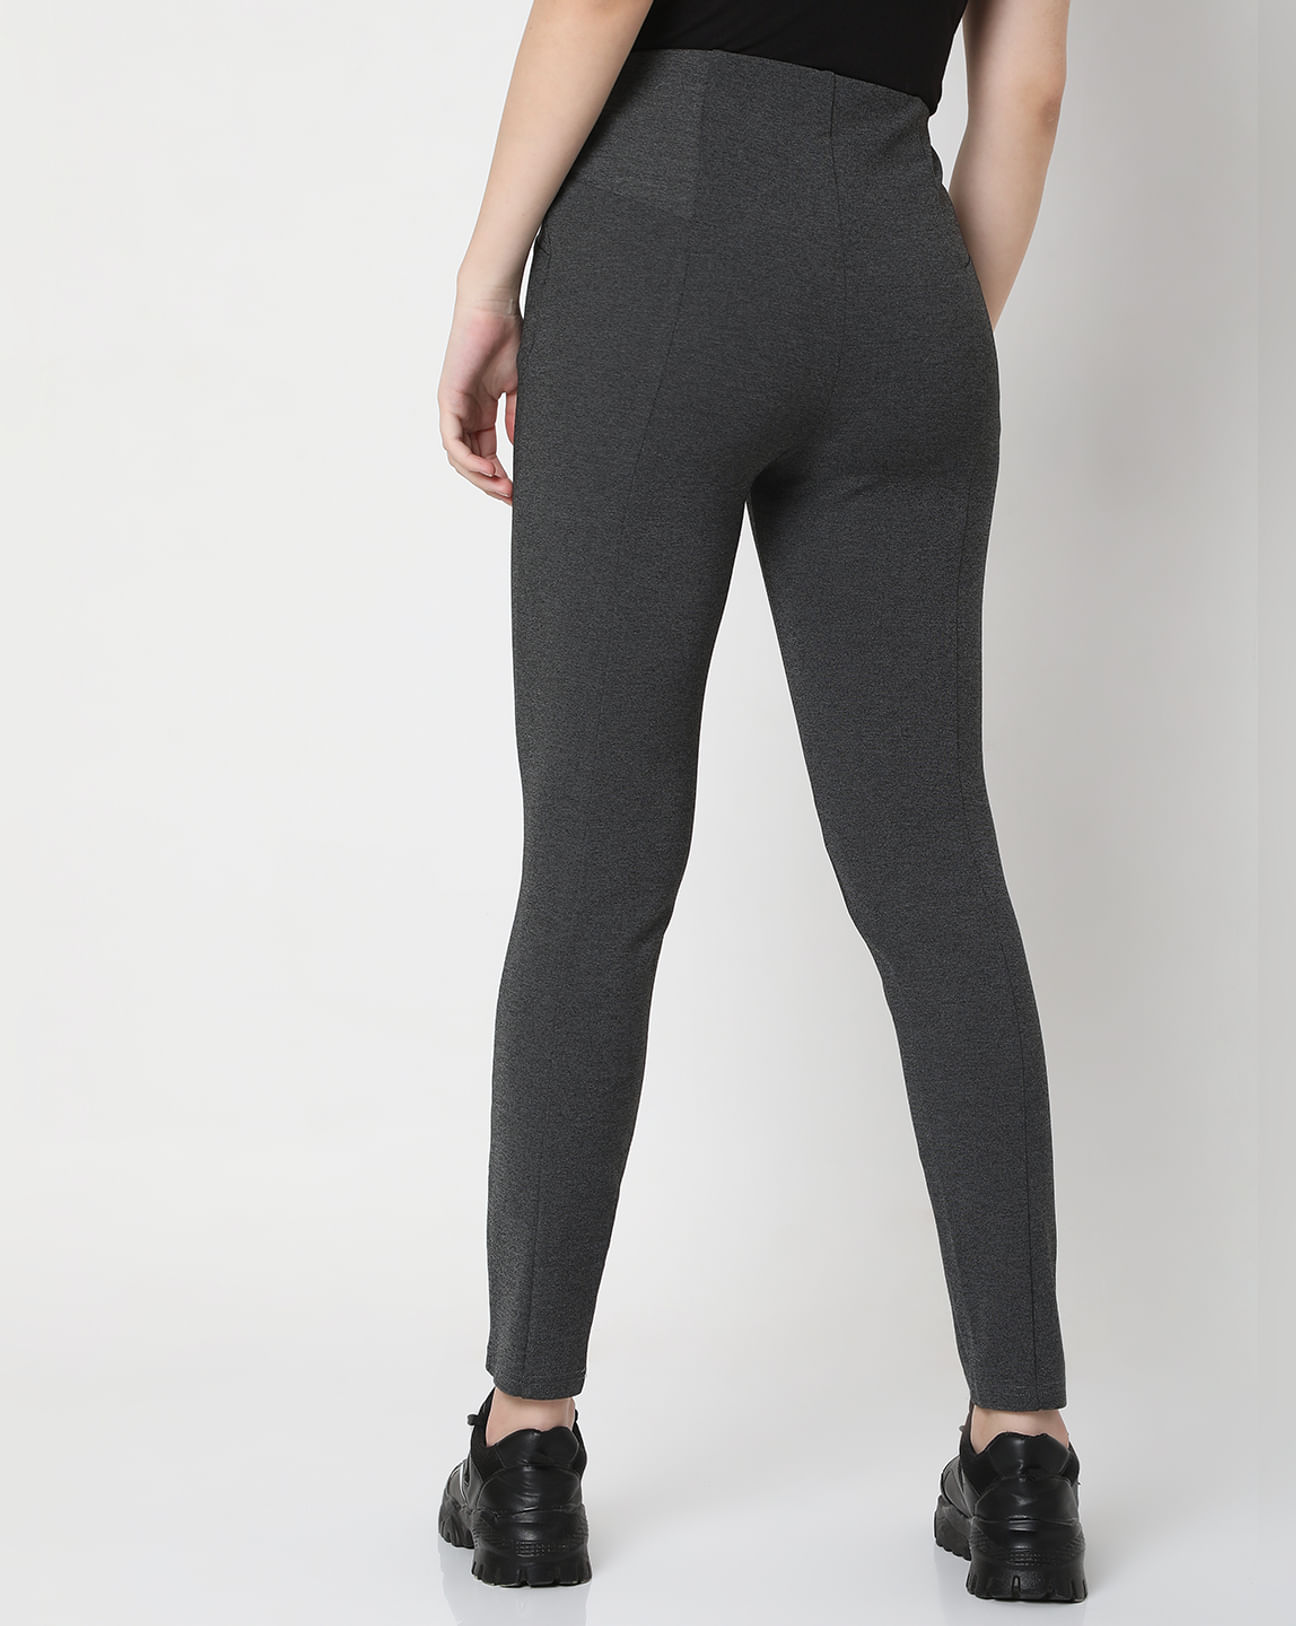 We Chillin' High Waisted Leggings in Grey